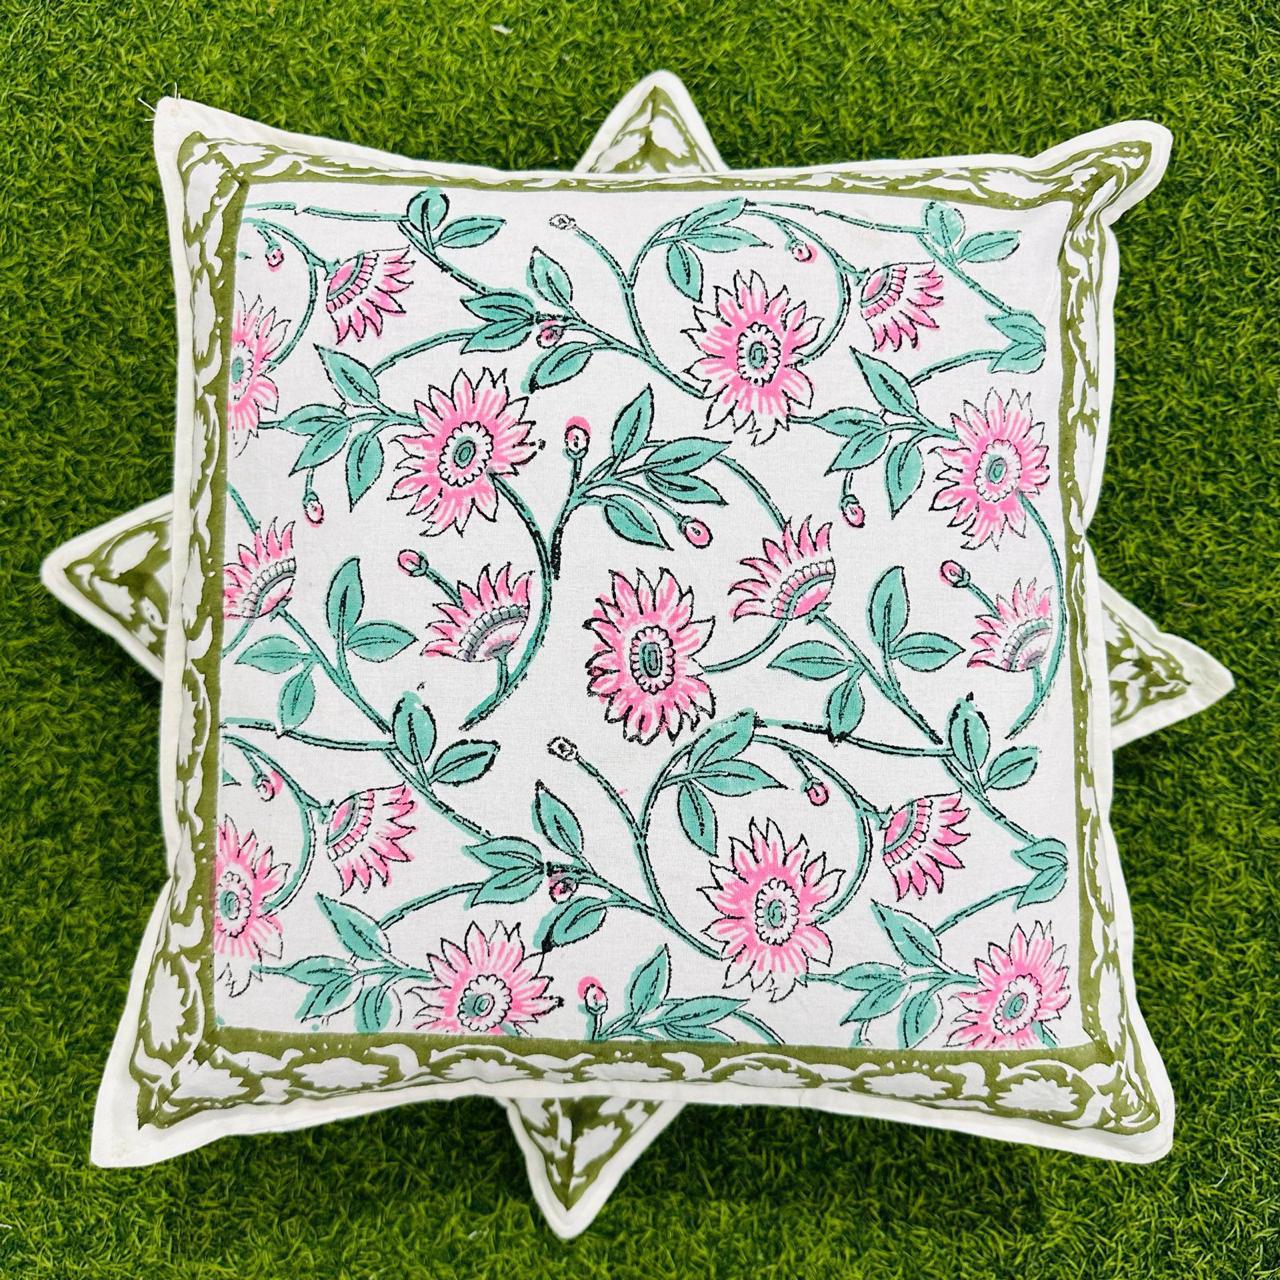 Set of 5 Floral Cushion Covers in White with Pink Flowers and Green Leaves(16"x16")